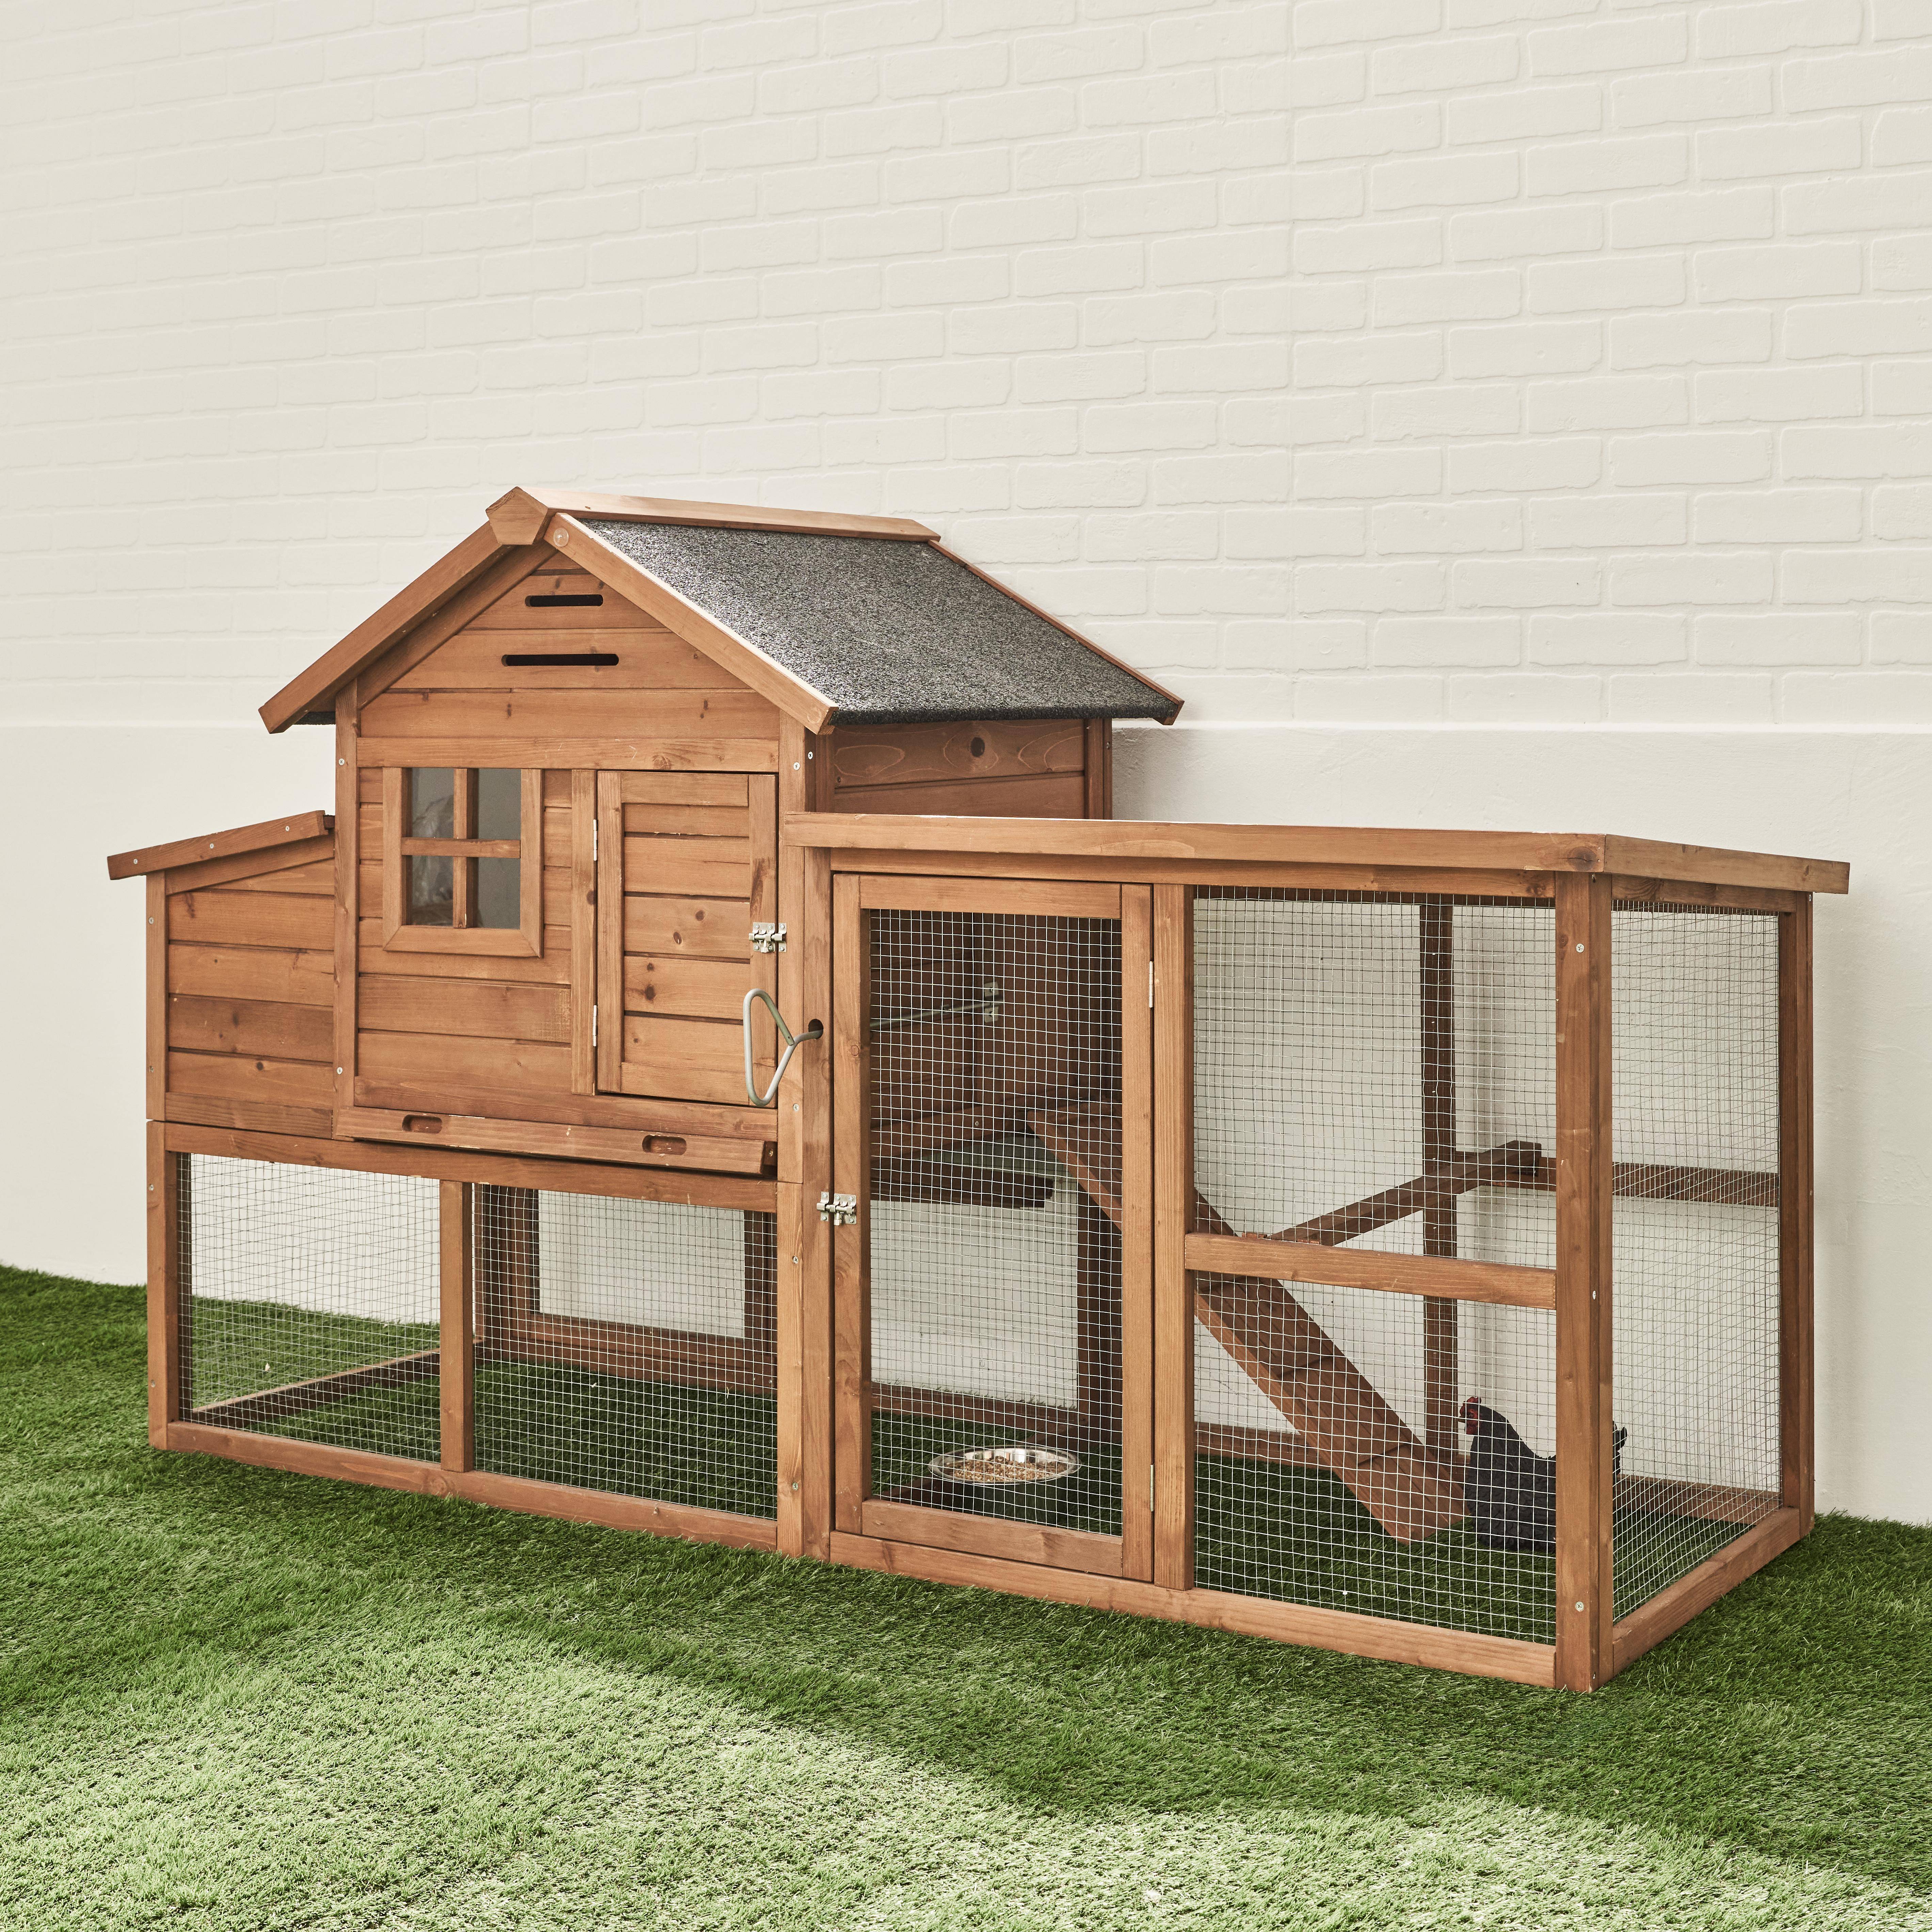 Wooden chicken coop for 4 chickens with nesting box, 195.5x75.5x116.5cm - Geline - Wood colour Photo1